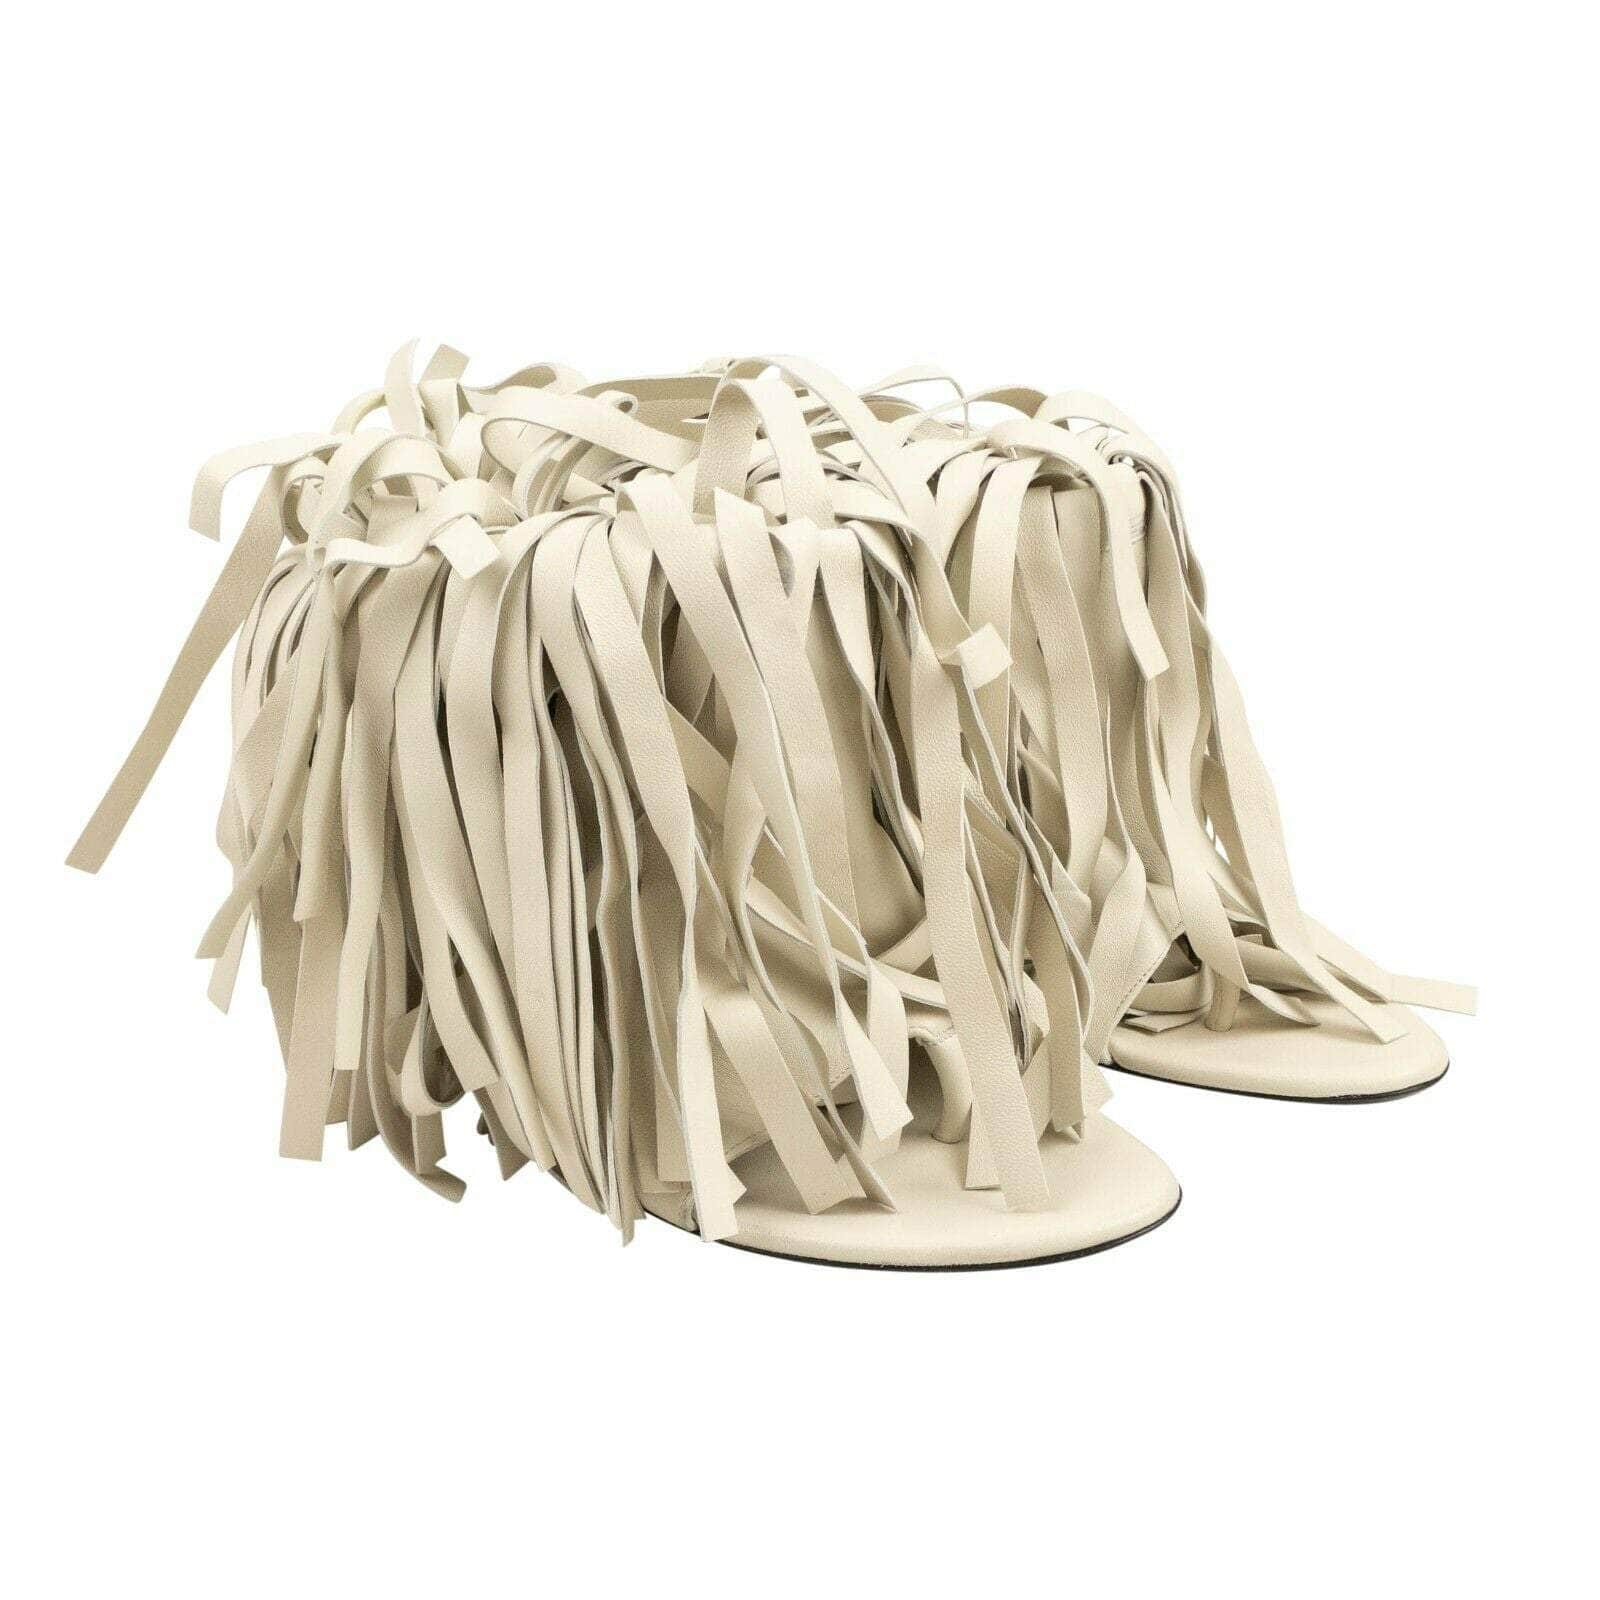 OFF-WHITE c/o VIRGIL ABLOH 1000-2000, channelenable-all, chicmi, couponcollection, gender-womens, main-shoes, off-white, off-white-c-o-virgil-abloh, owjuly4, size-39 39 White Leather Fringe Heels 82NGG-OW-2160/39 82NGG-OW-2160/39